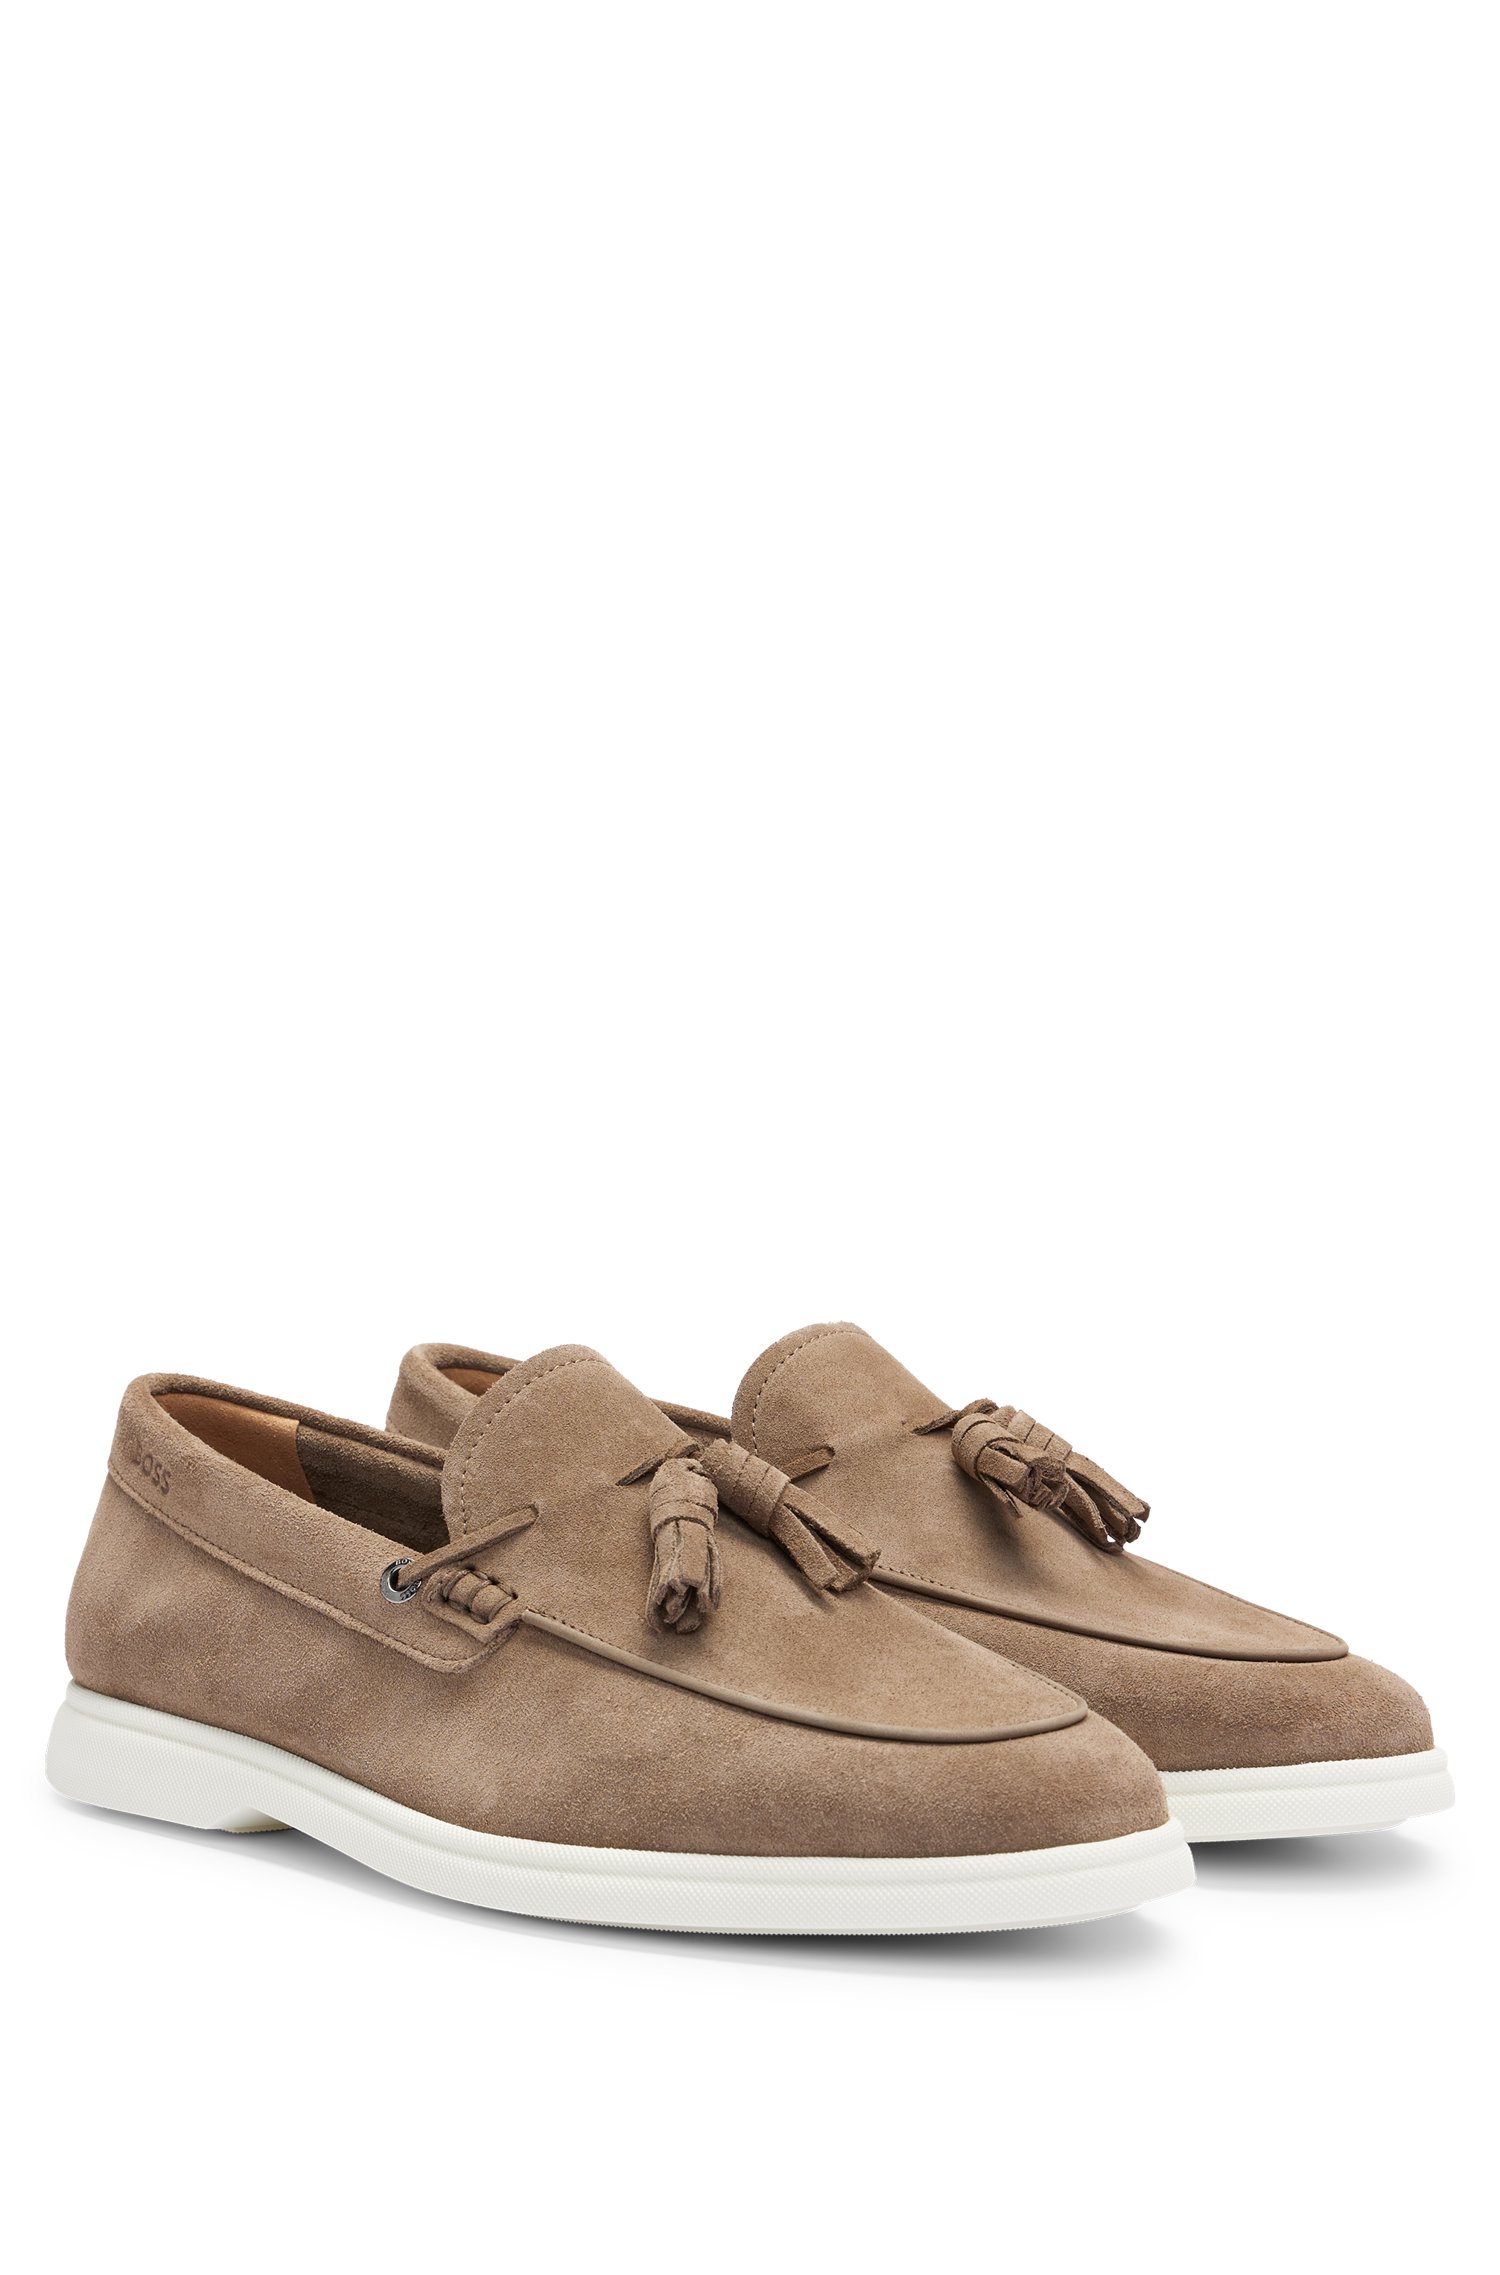 Suede slip-on loafers with tassel trim